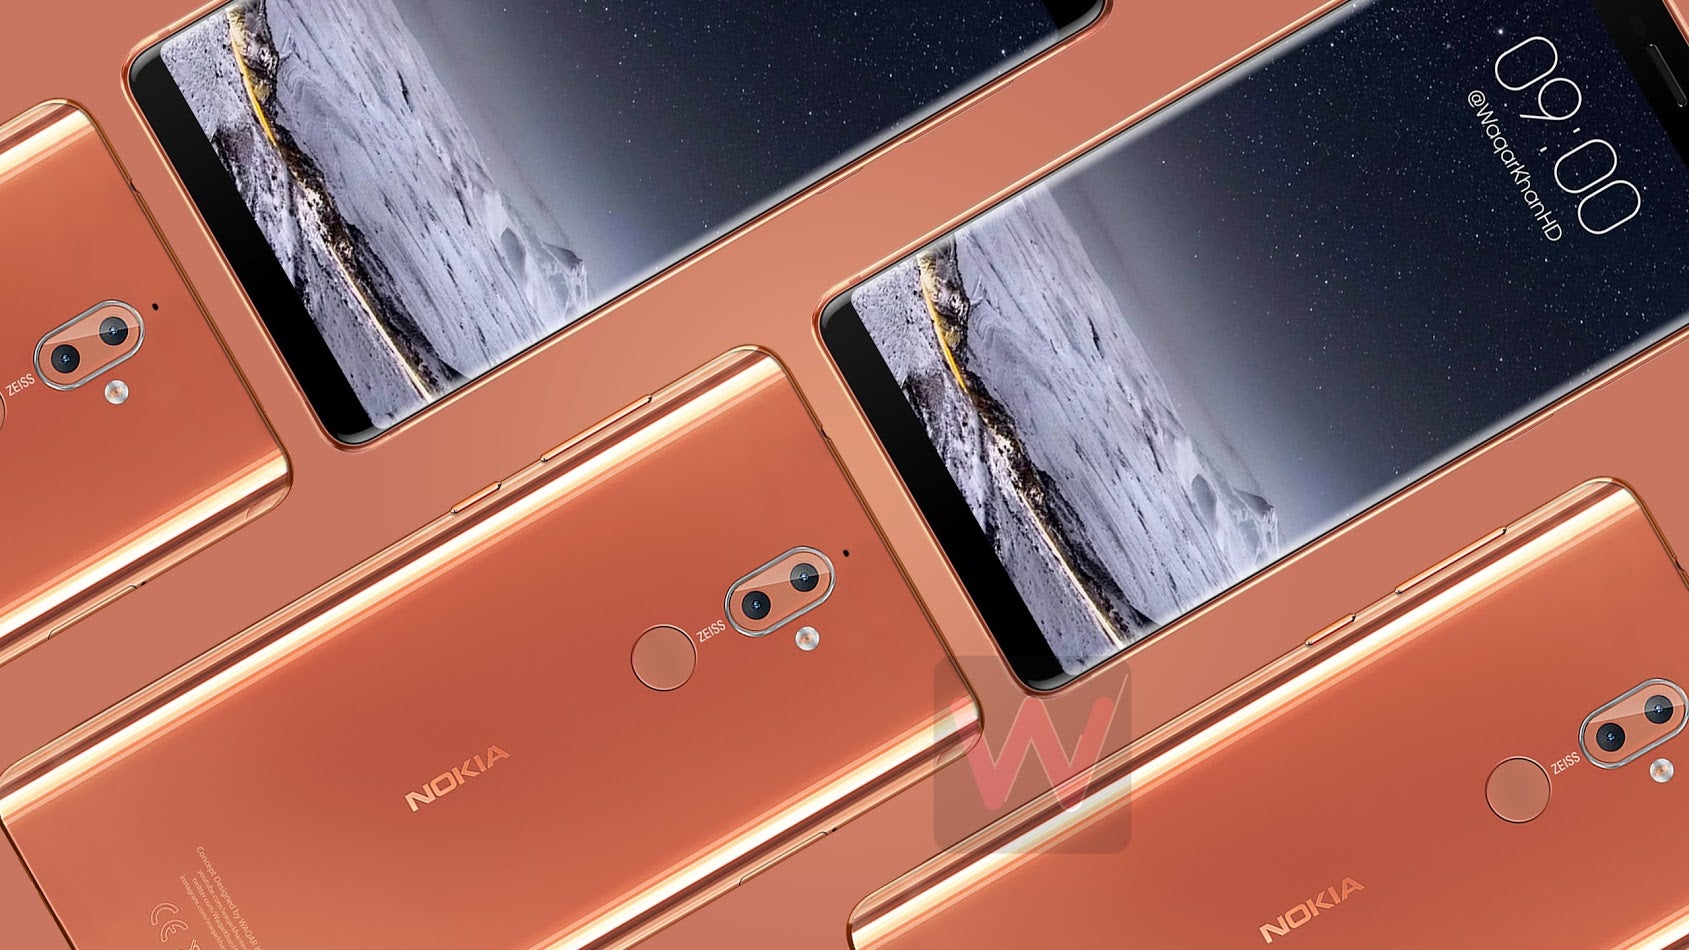 Nokia 9 unofficial render by Waqar Khan - Nokia 9 mock-up and renders emerge, might give us a first look at the handset